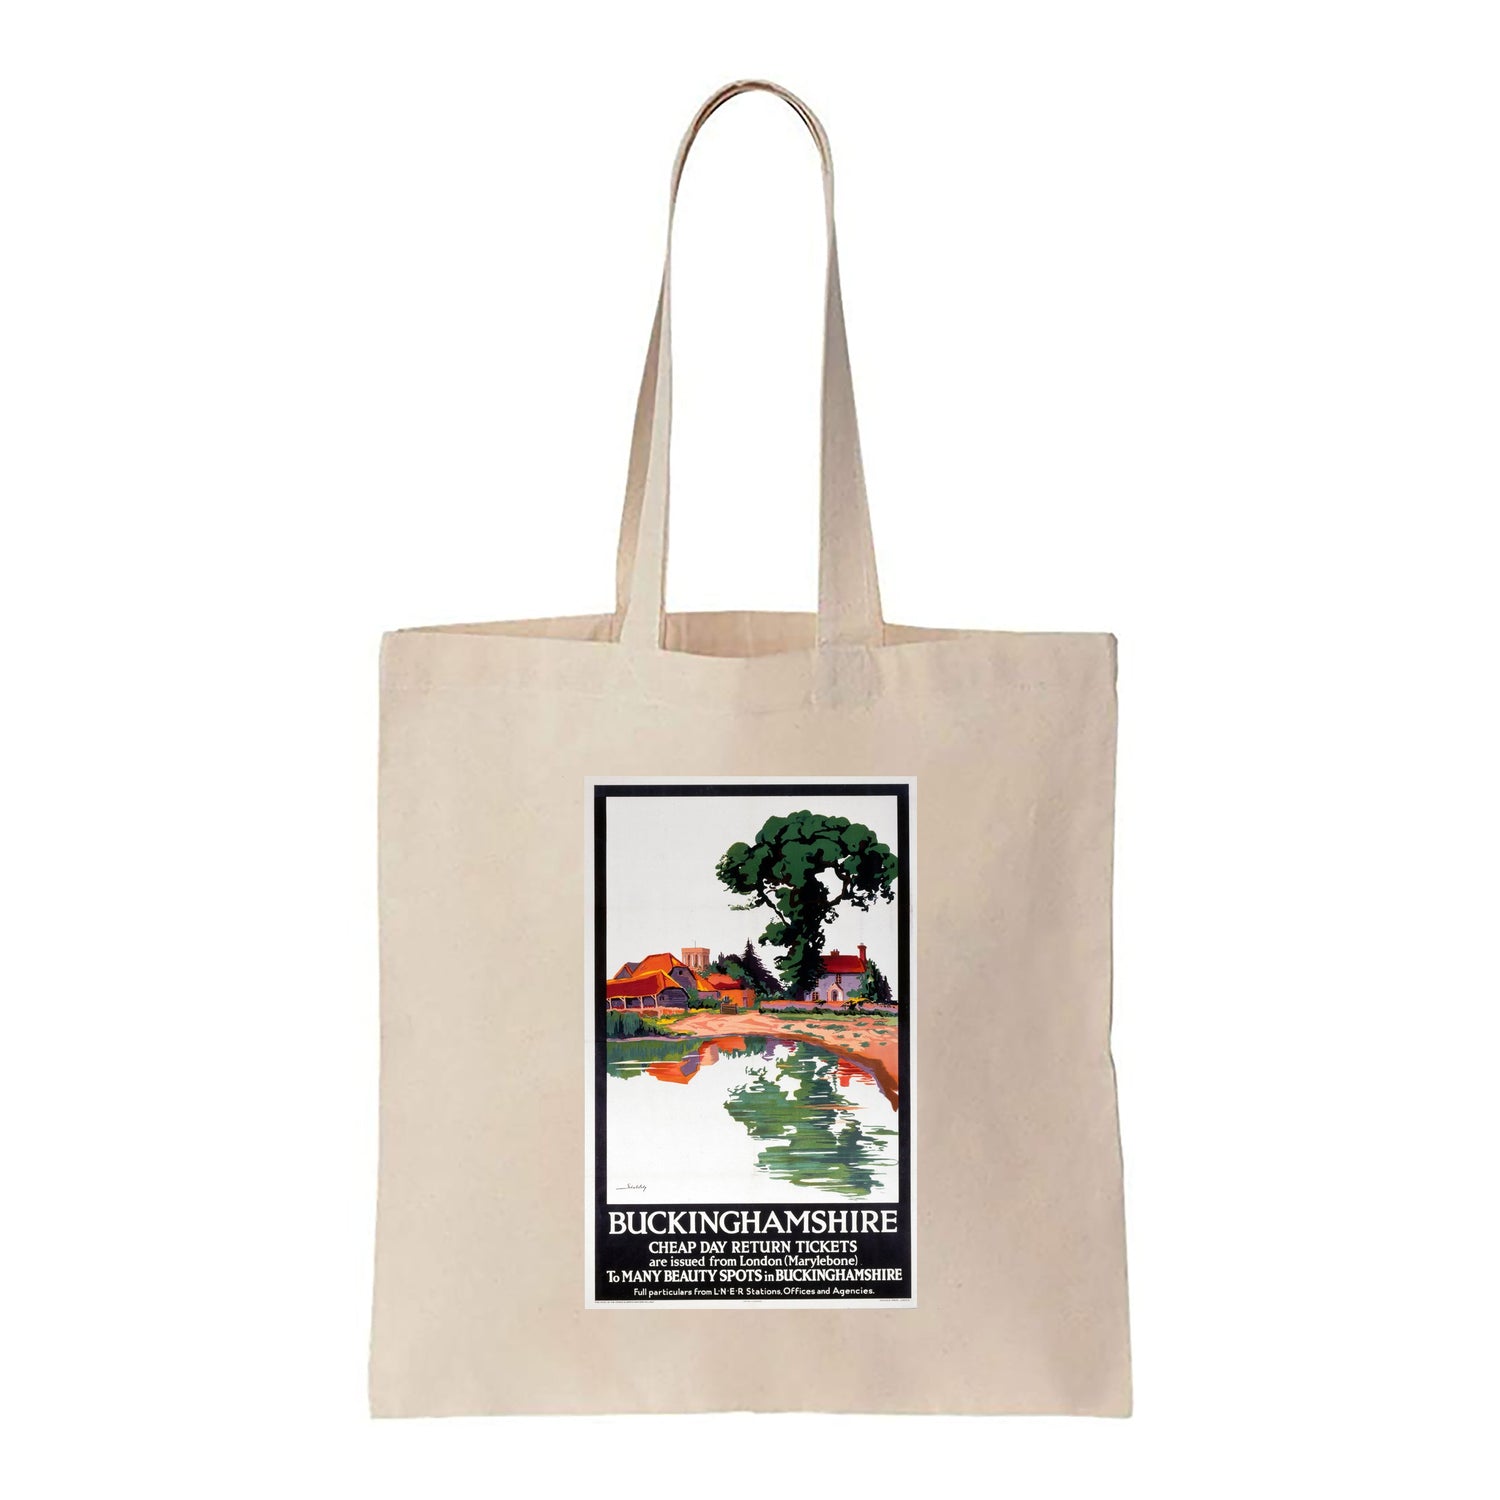 Buckinghamshire by LNER - Canvas Tote Bag